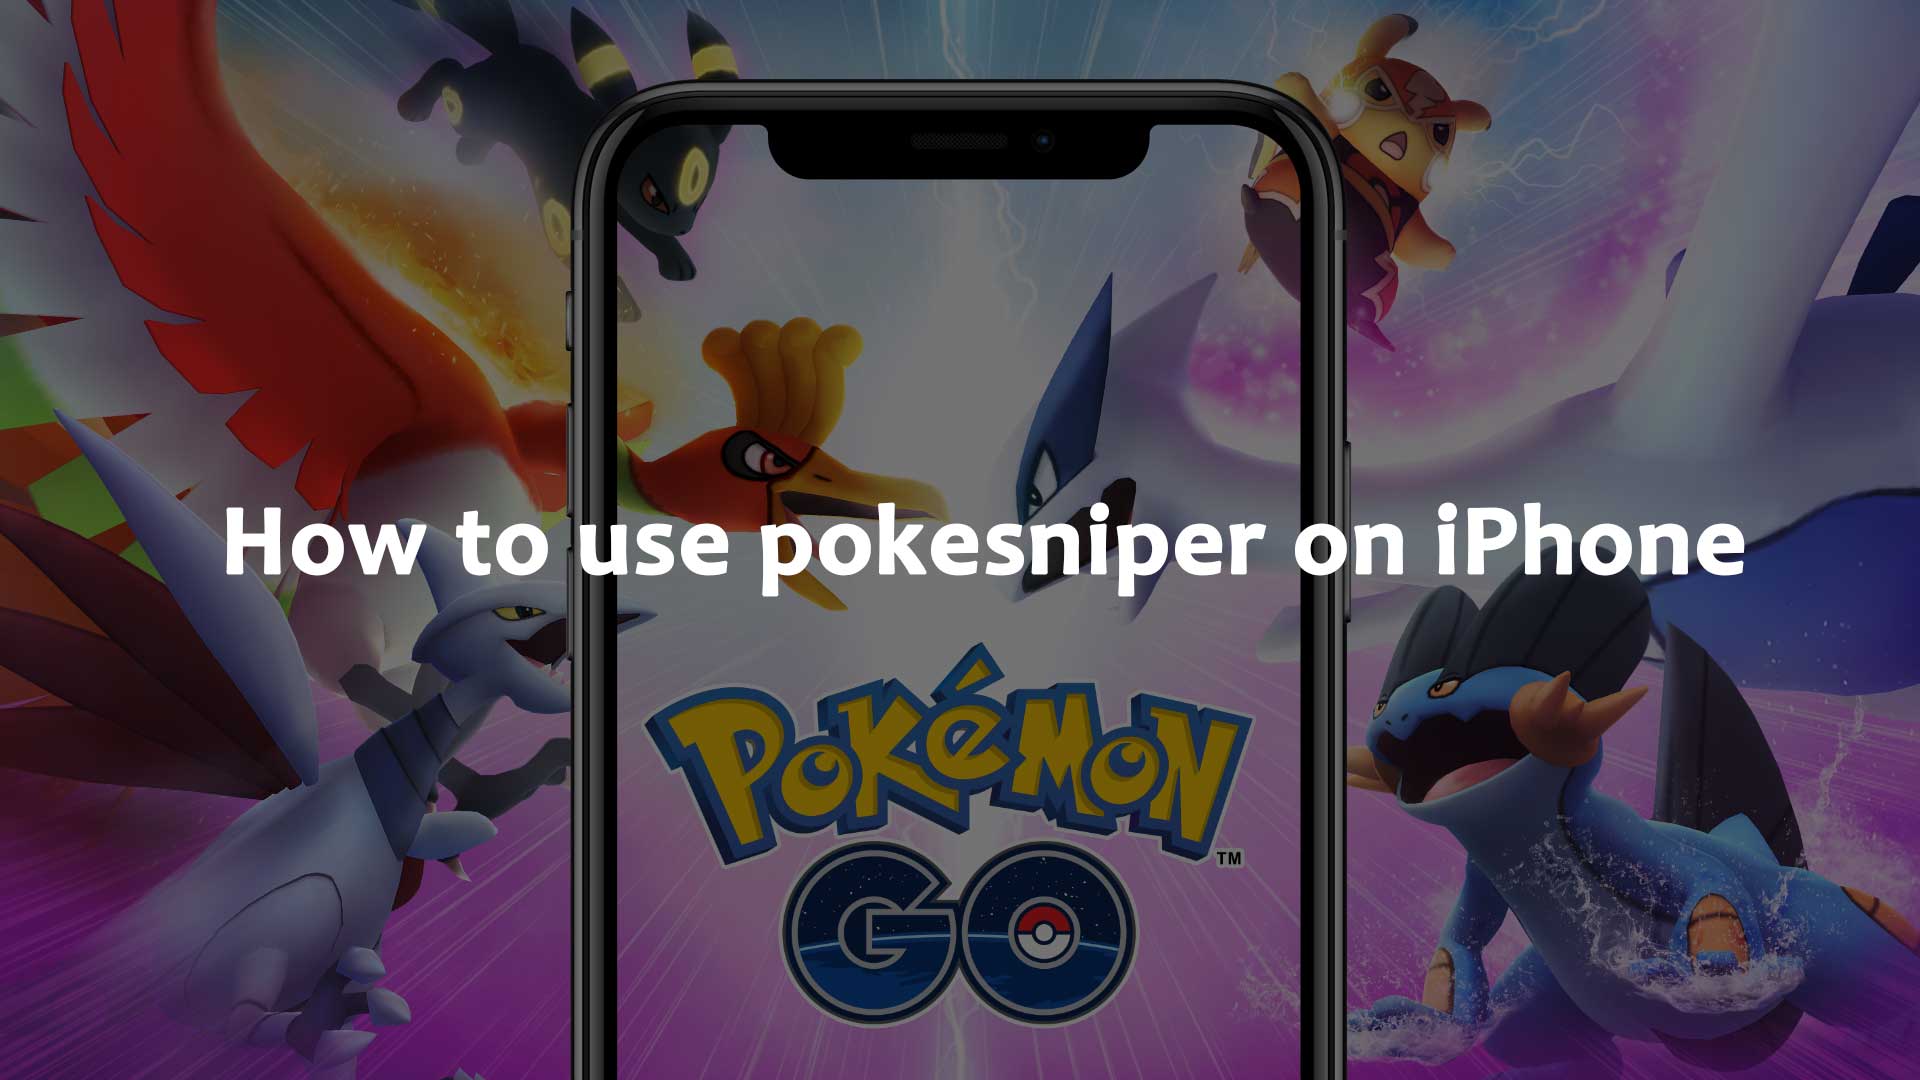 How to use pokesniper on iPhone